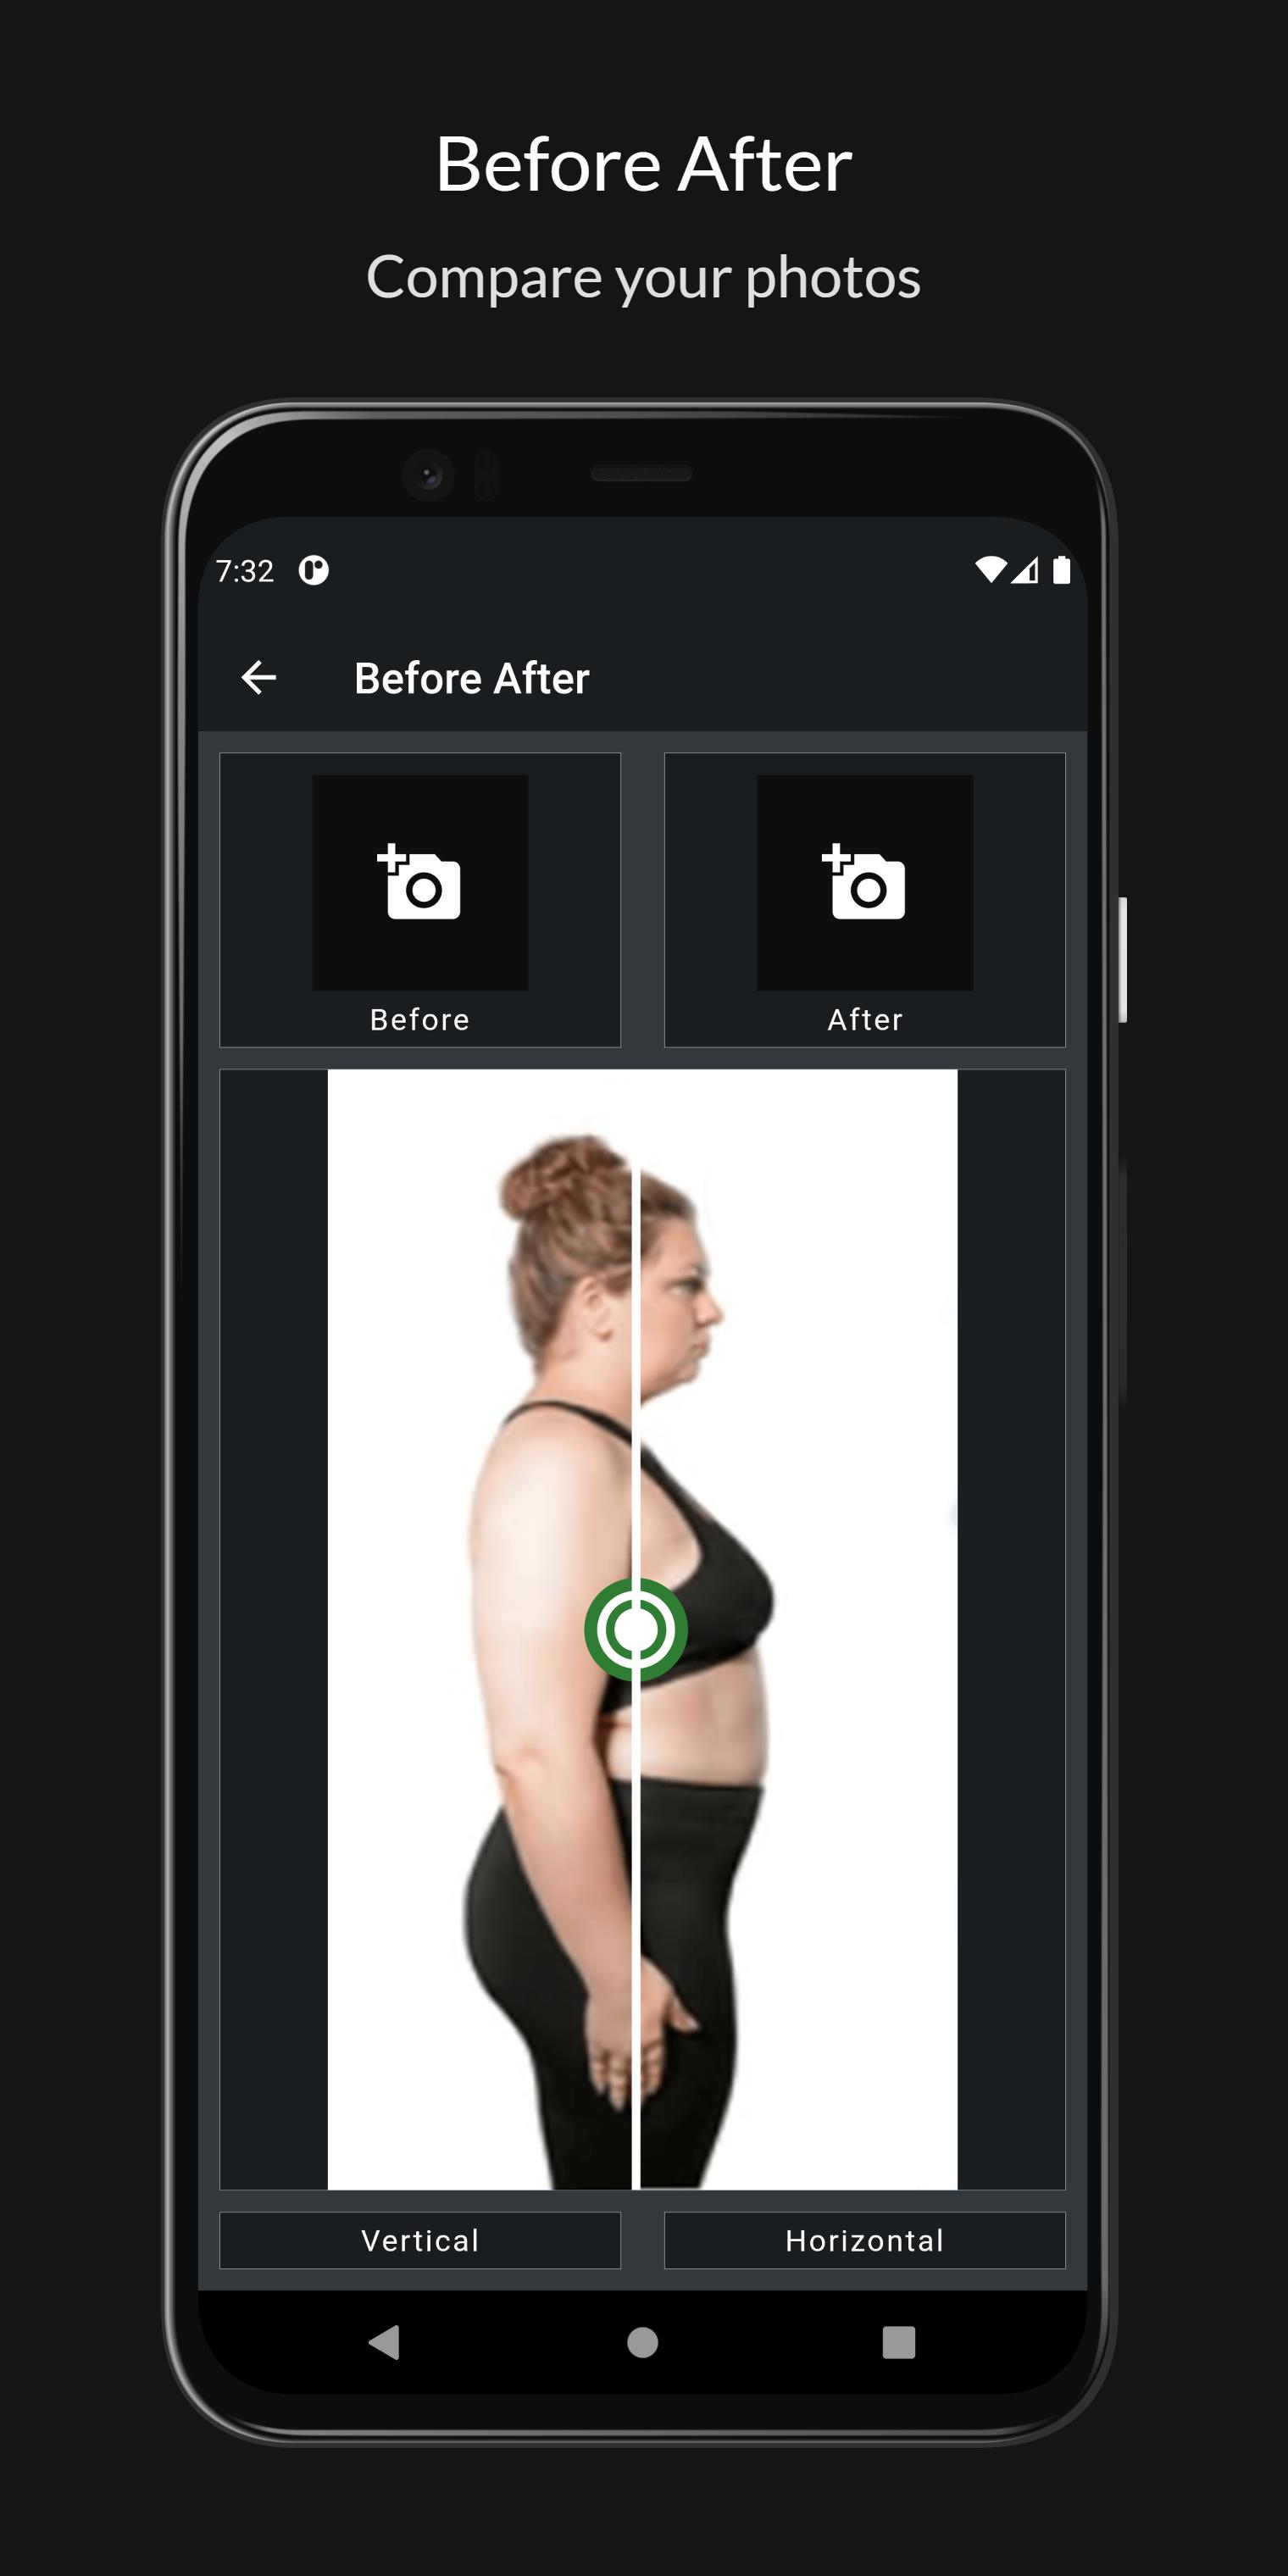 All in One Fitness - Weight Loss, Workouts & More 1.2.2 Screenshot 4